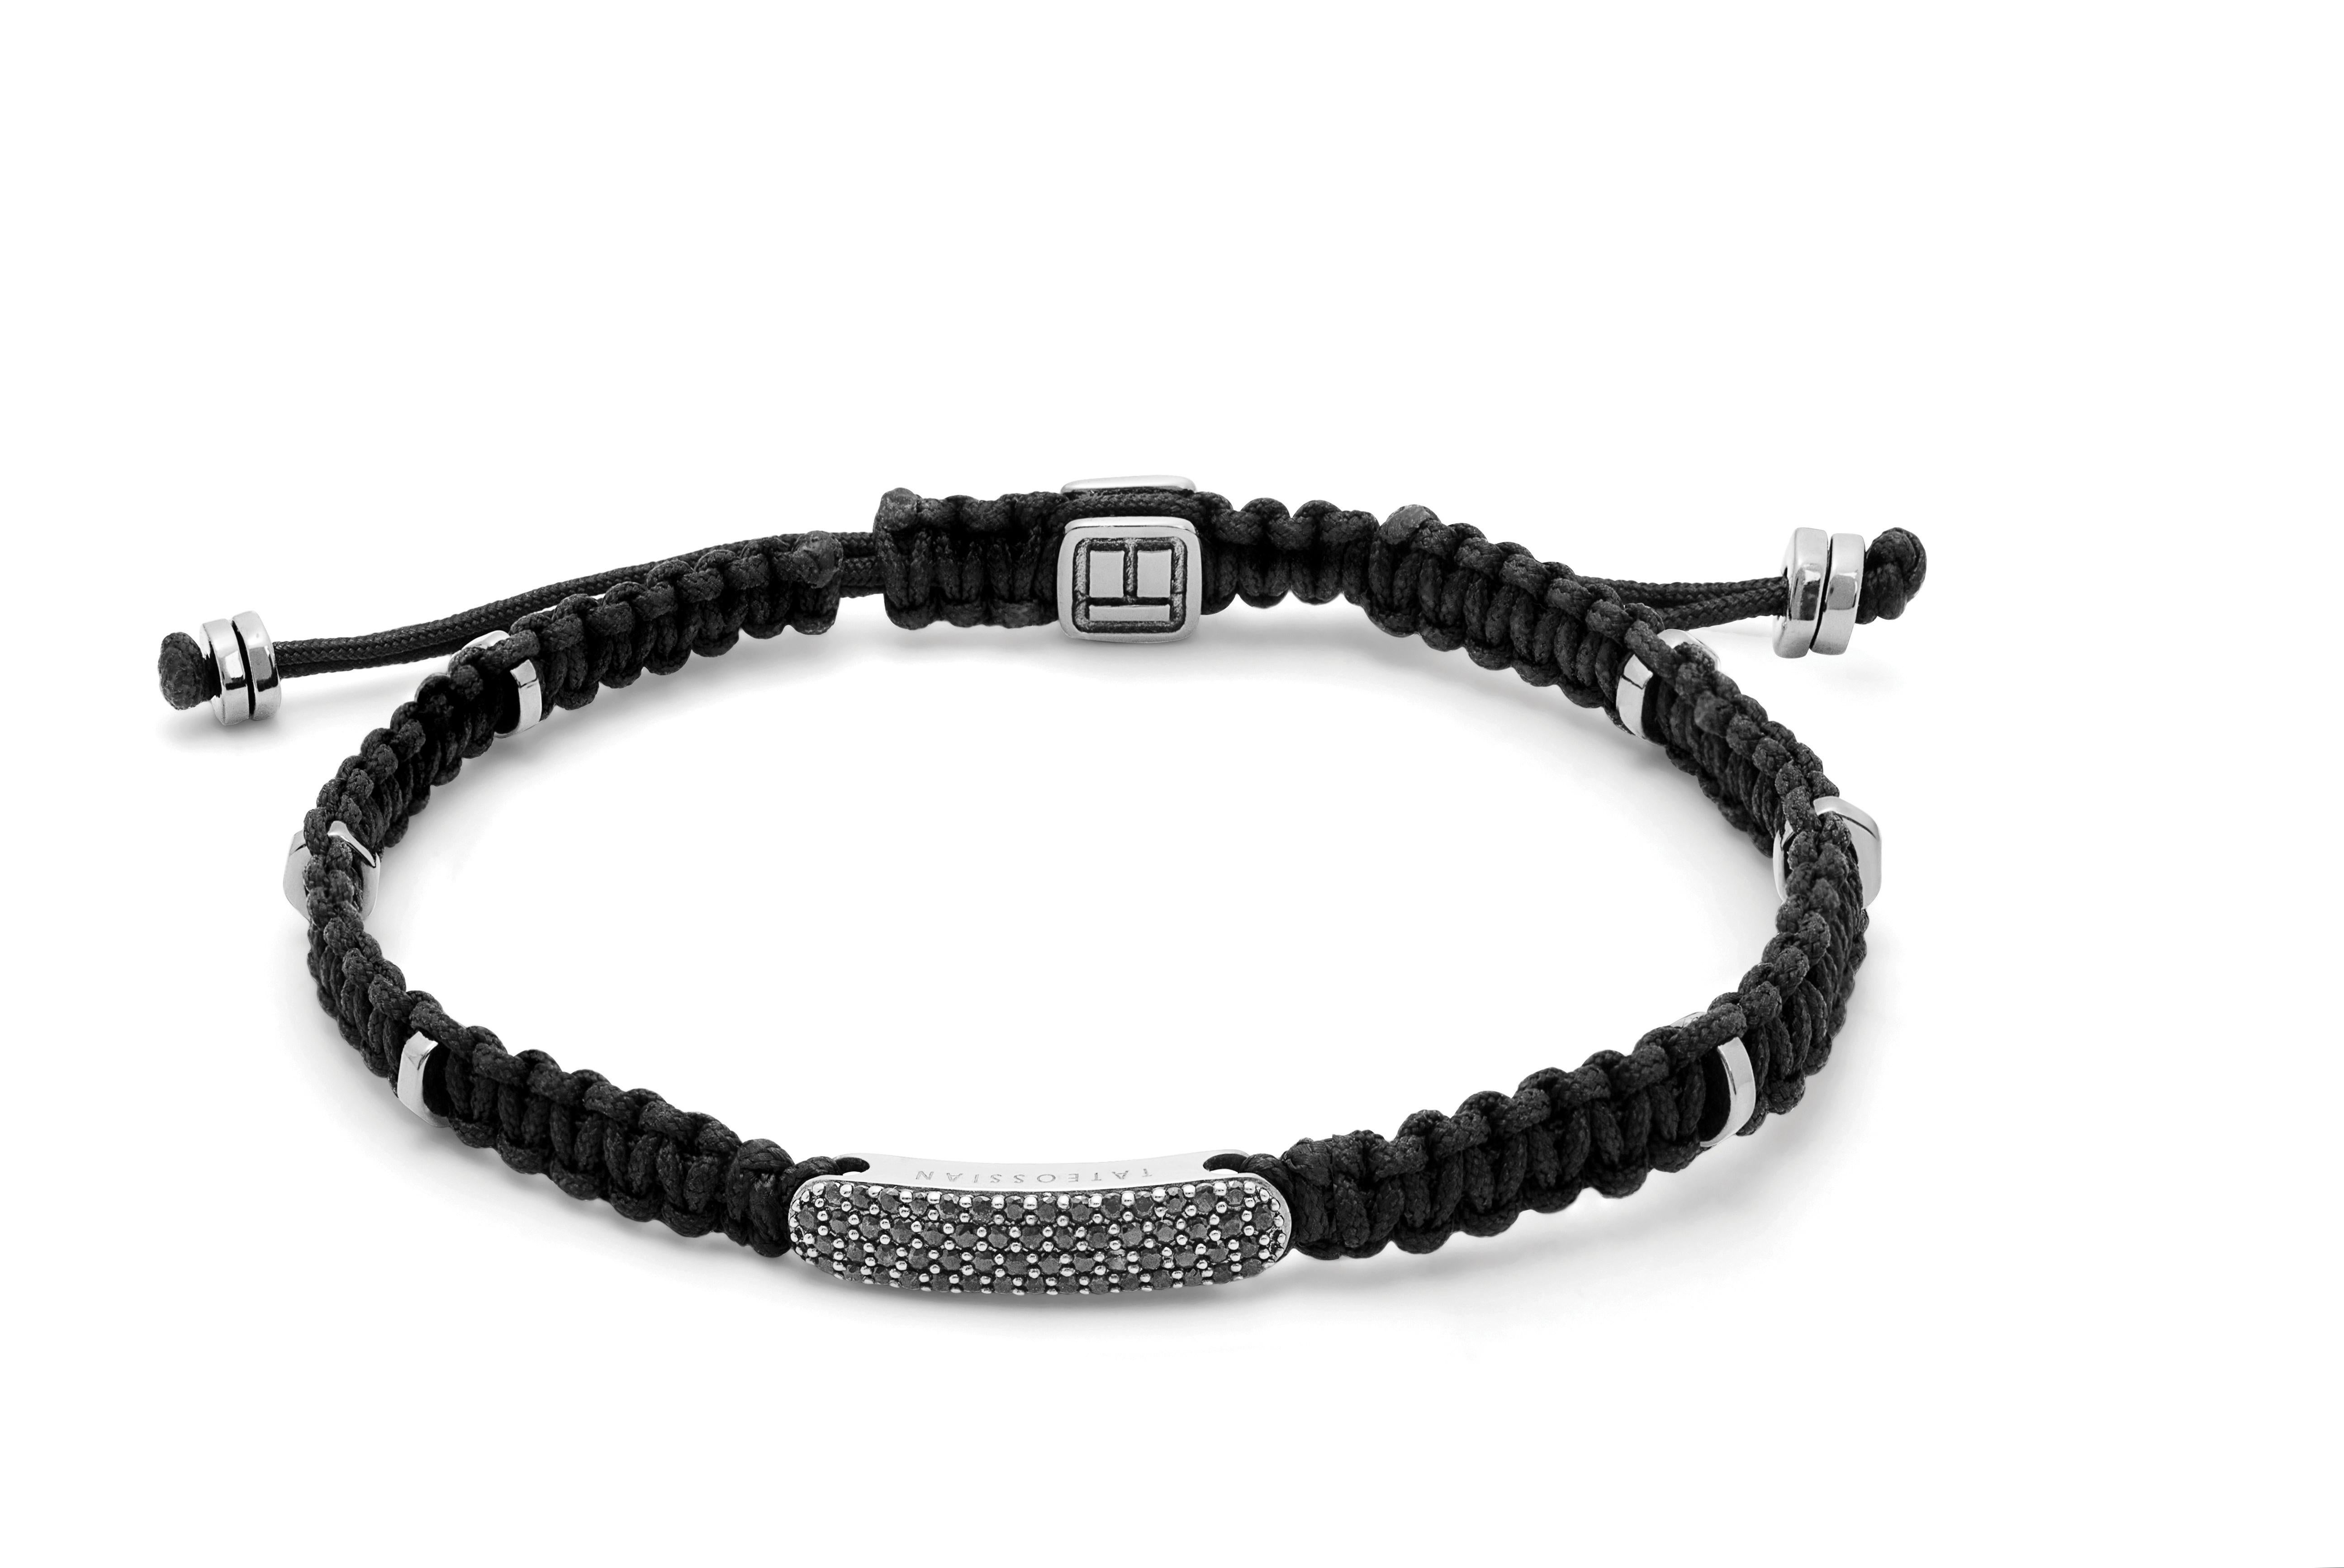 Black Diamond Baton Bracelet in Black Macramé and Sterling Silver, Size L In New Condition For Sale In Fulham business exchange, London